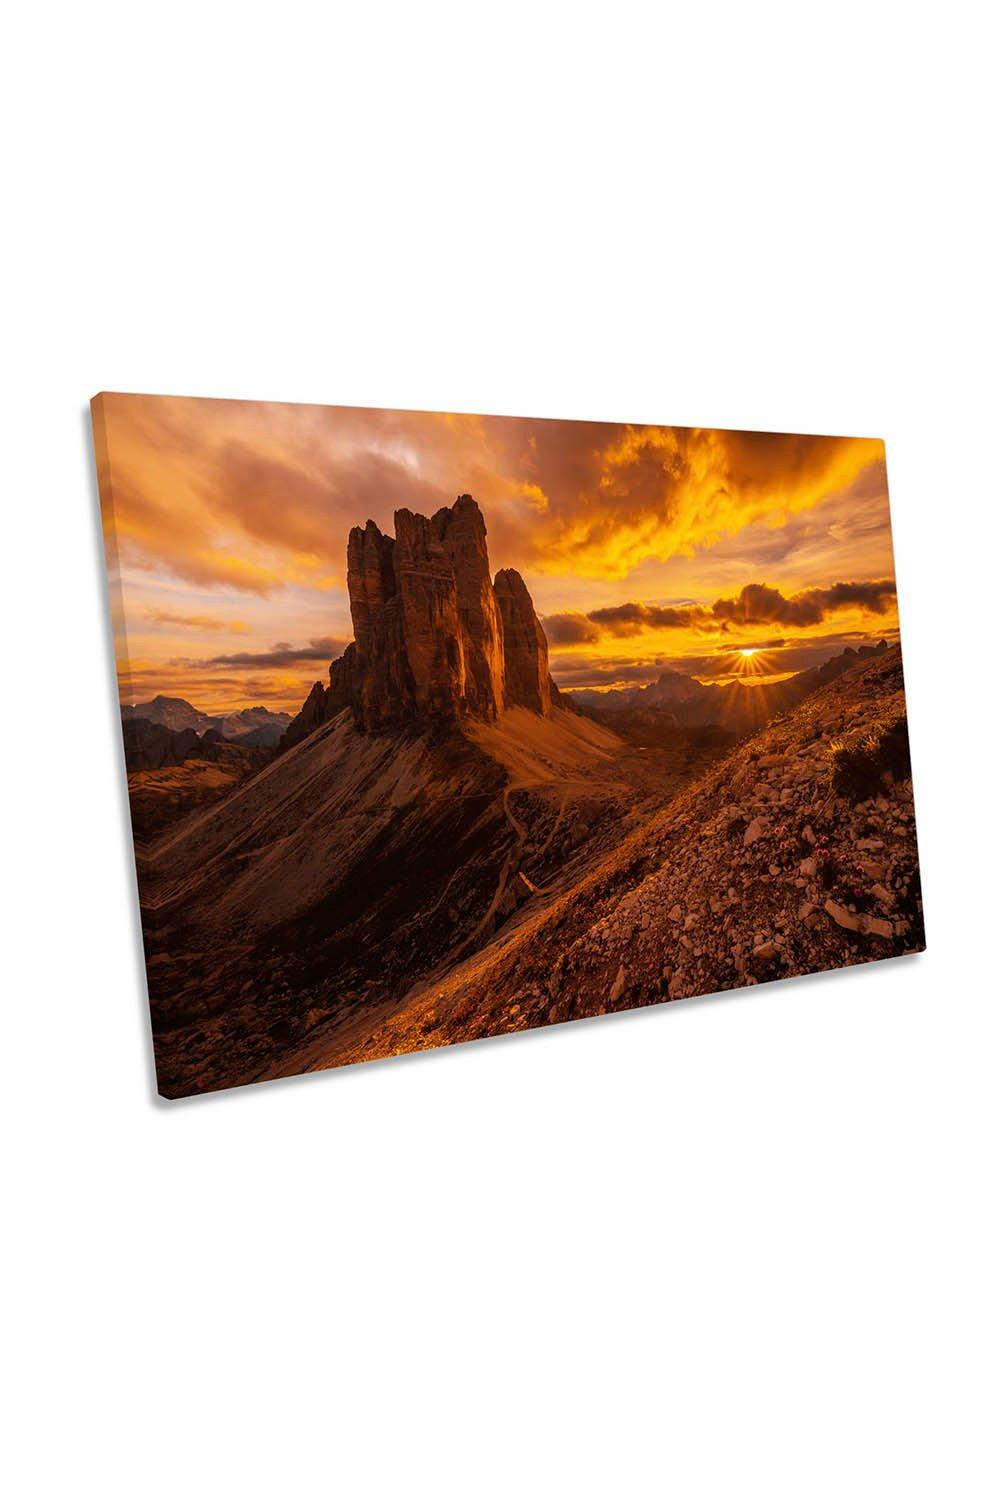 Monumental Strike Sunset Dolomites Italy Canvas Wall Art Picture Print